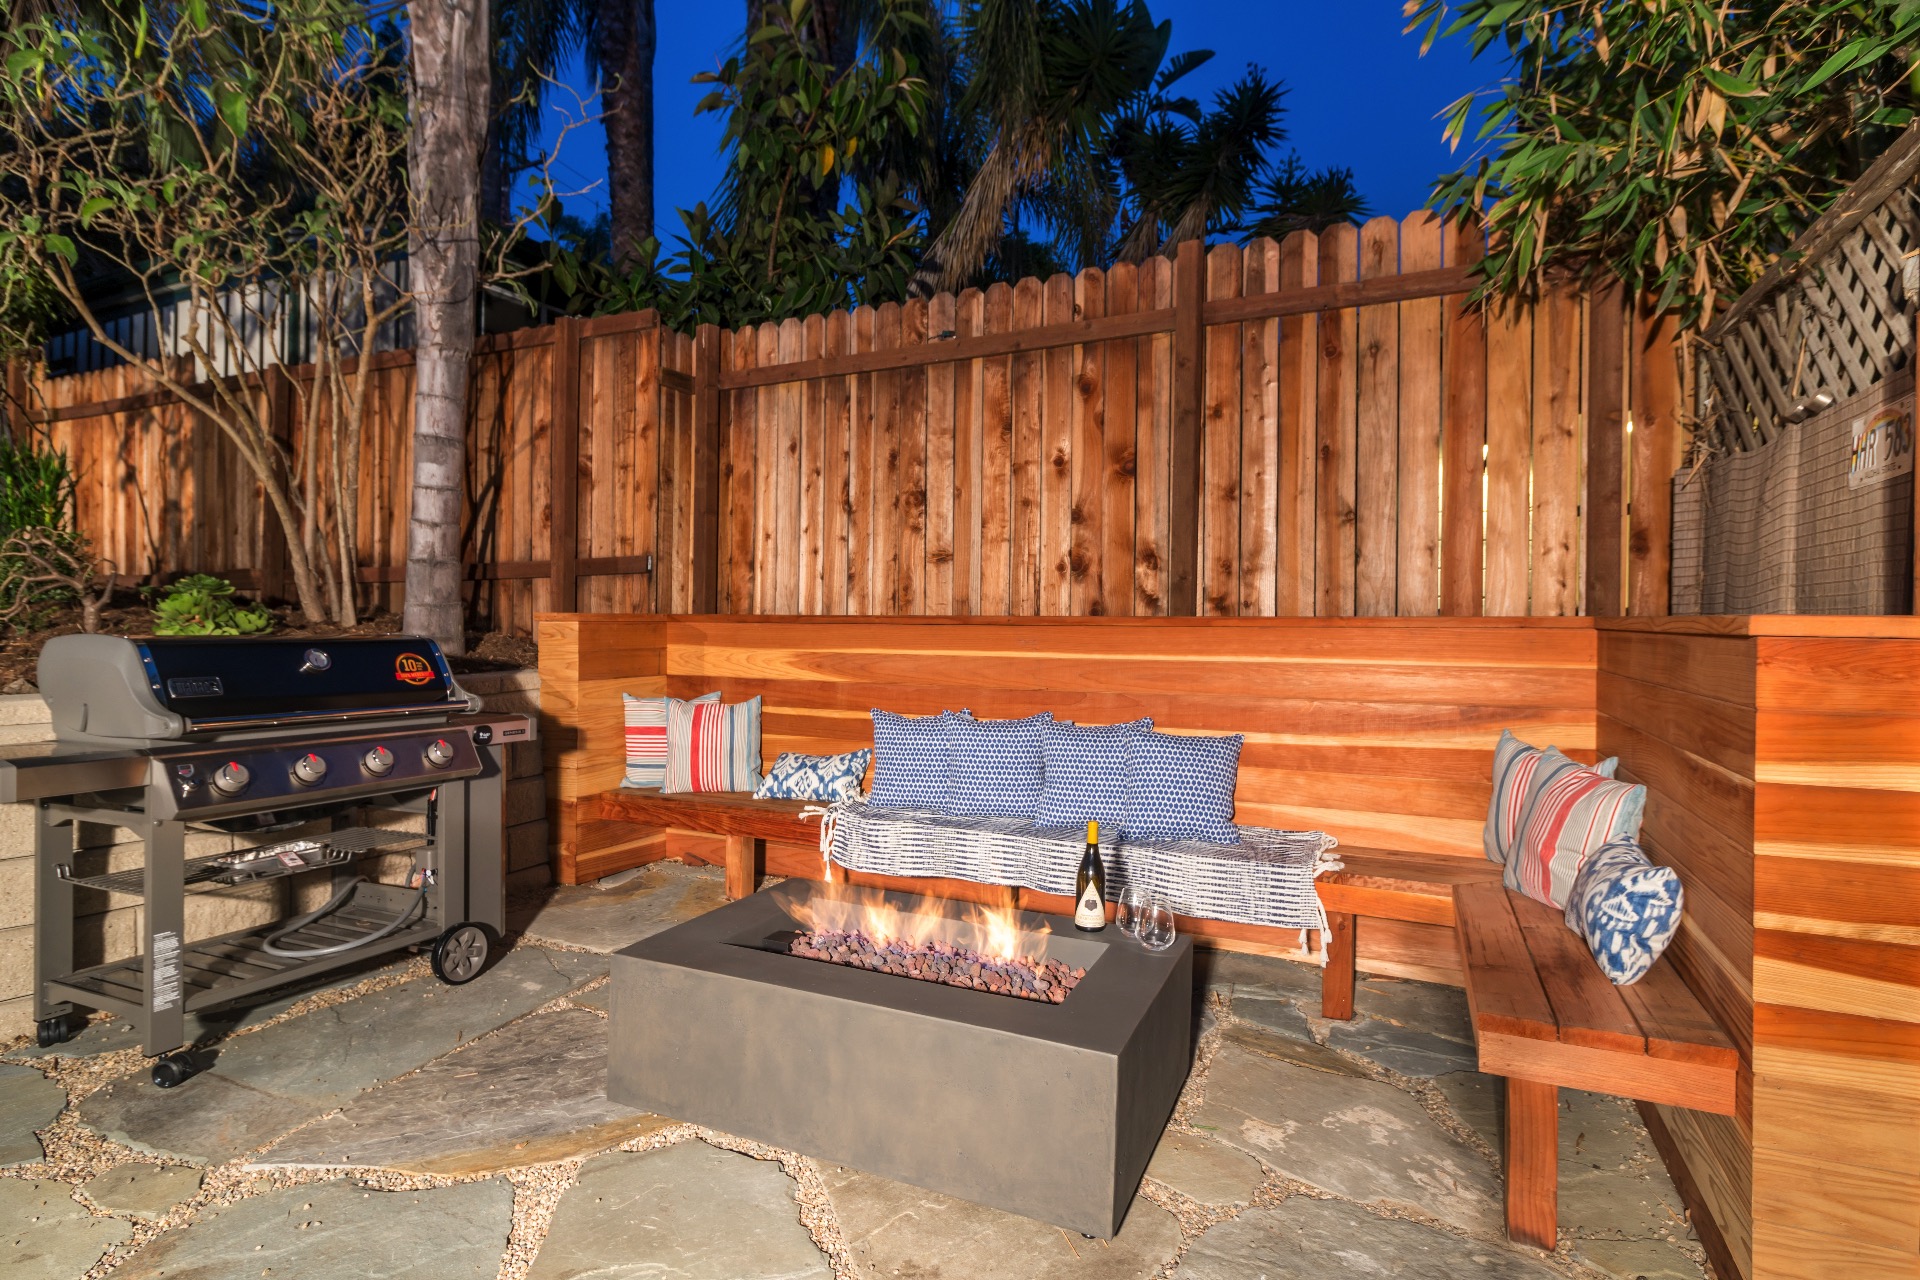 Genesis II Gas Grill, Cozy Fire Table and a Custom Made Wooden Bench